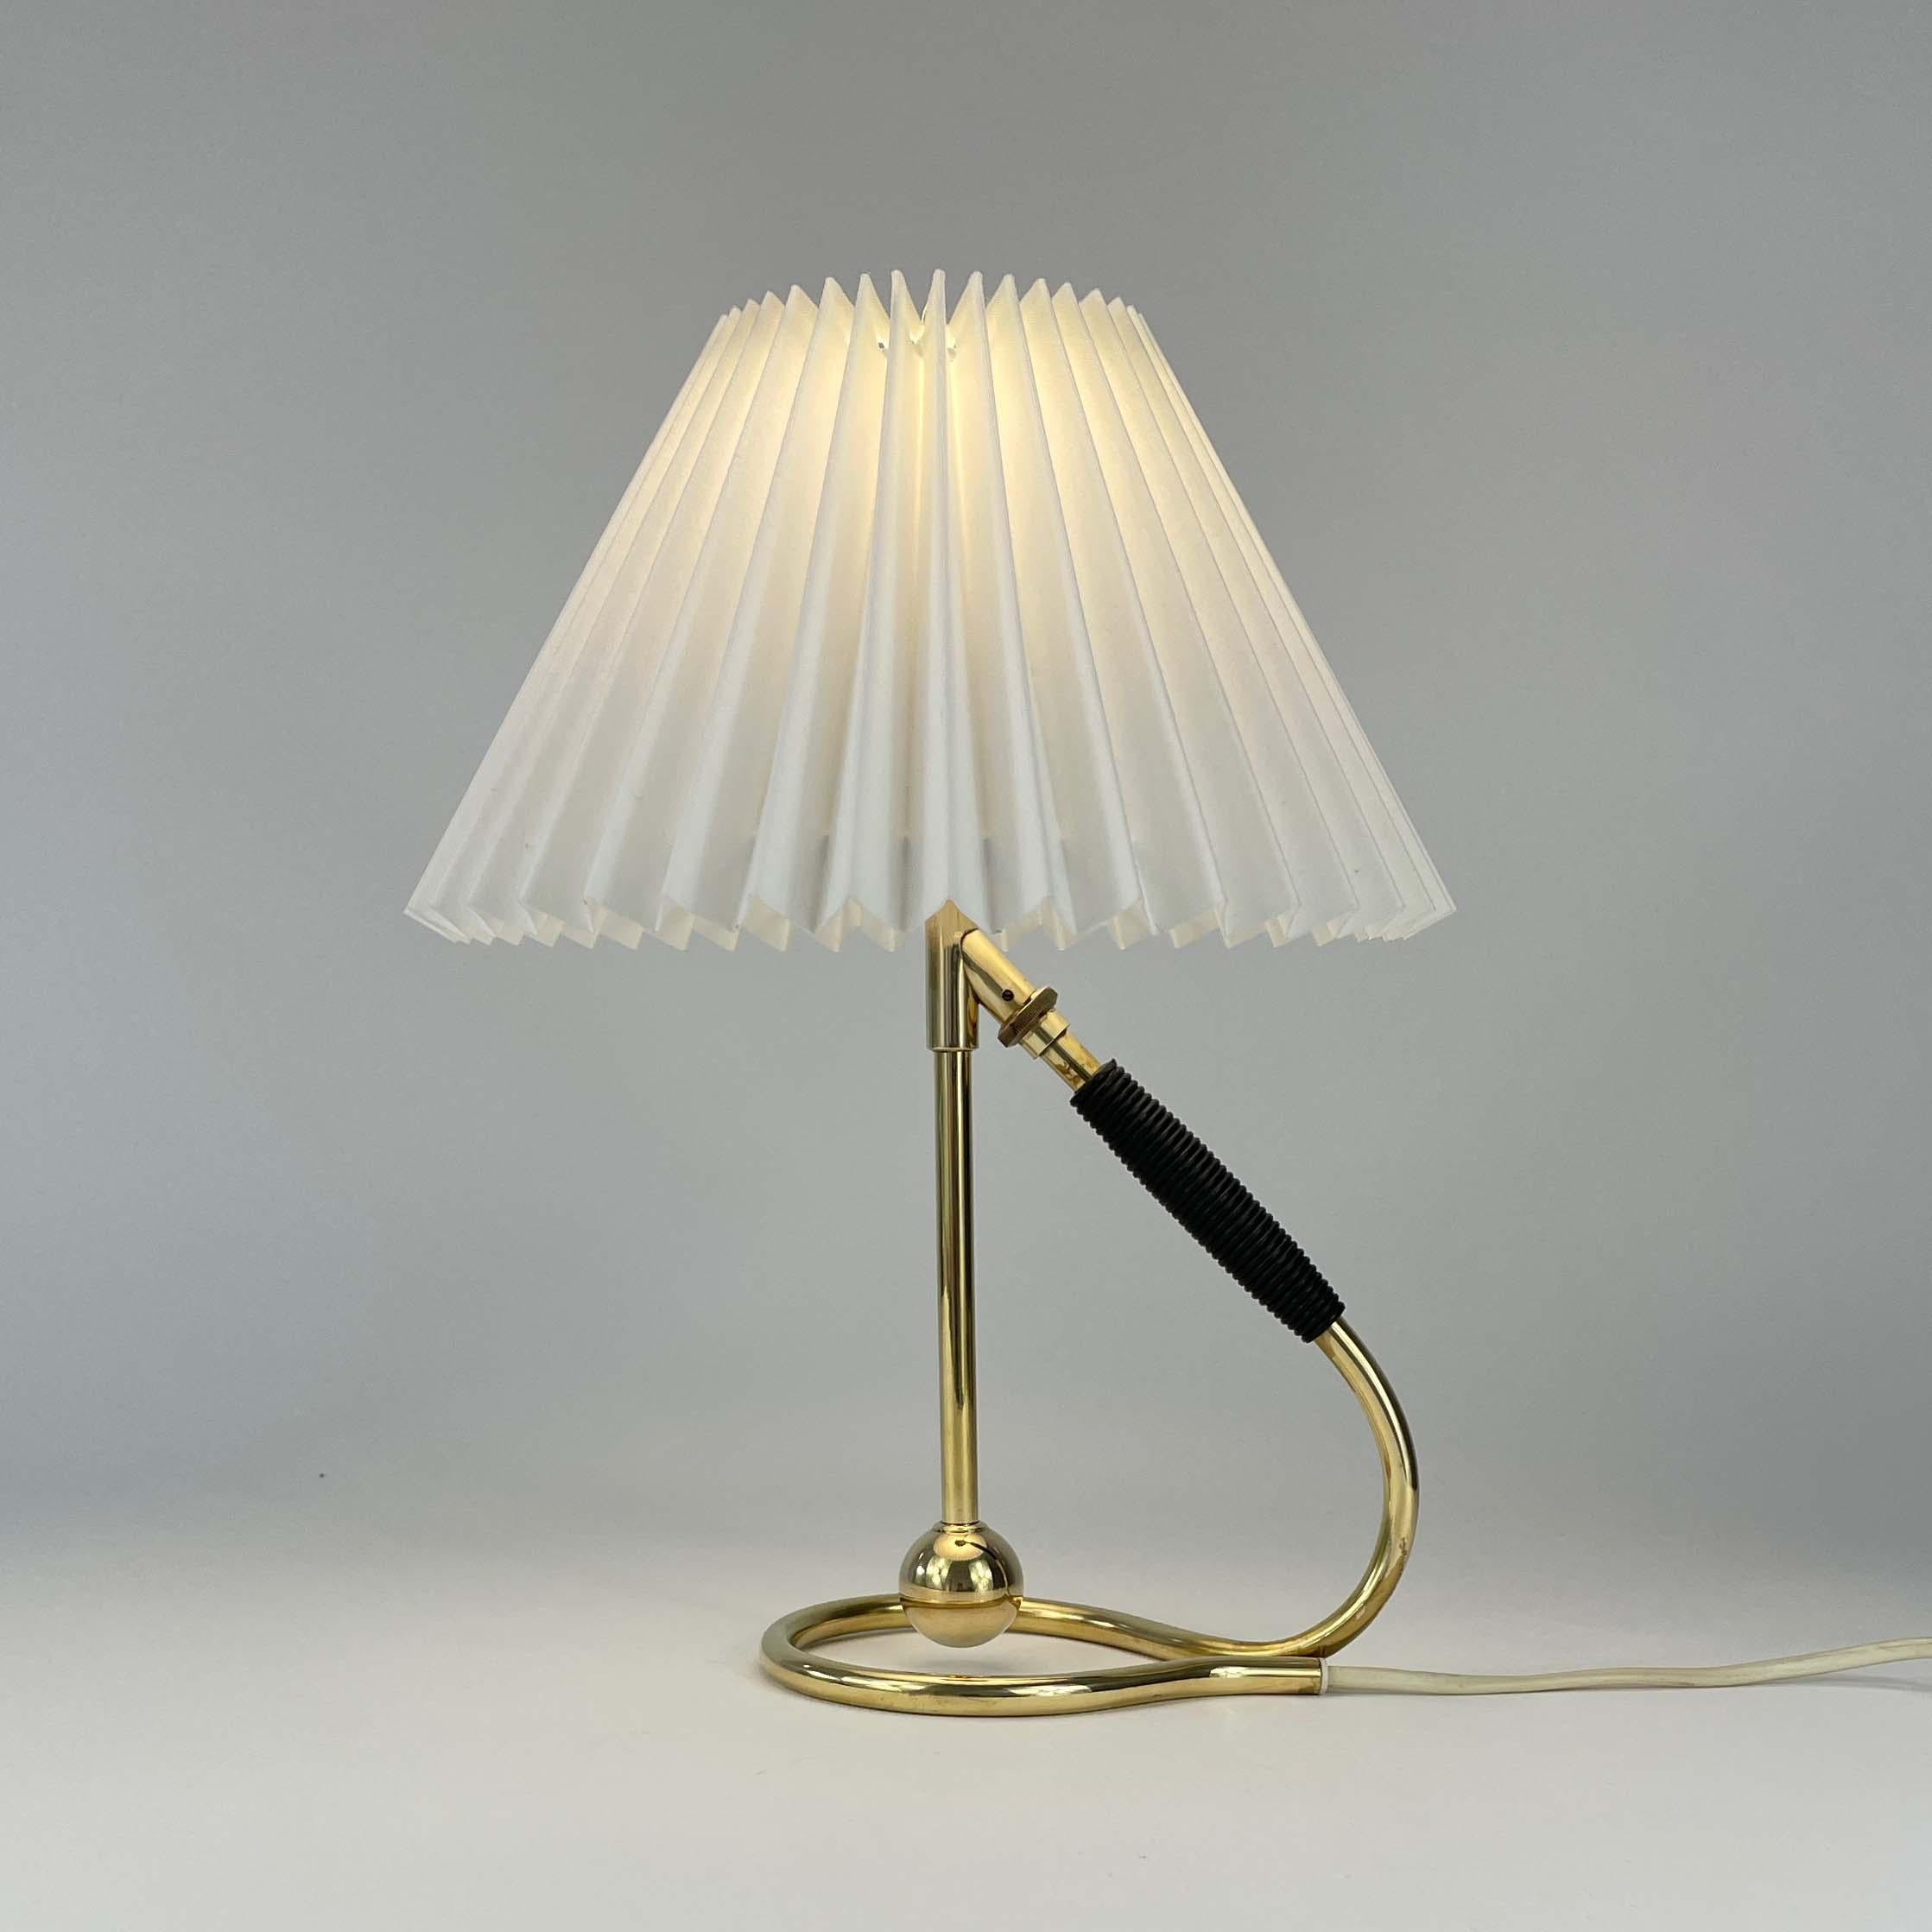 Adjustable Brass and Bakelite Wall and Table Lamp 306 by Kaare Klint, 1950s For Sale 5